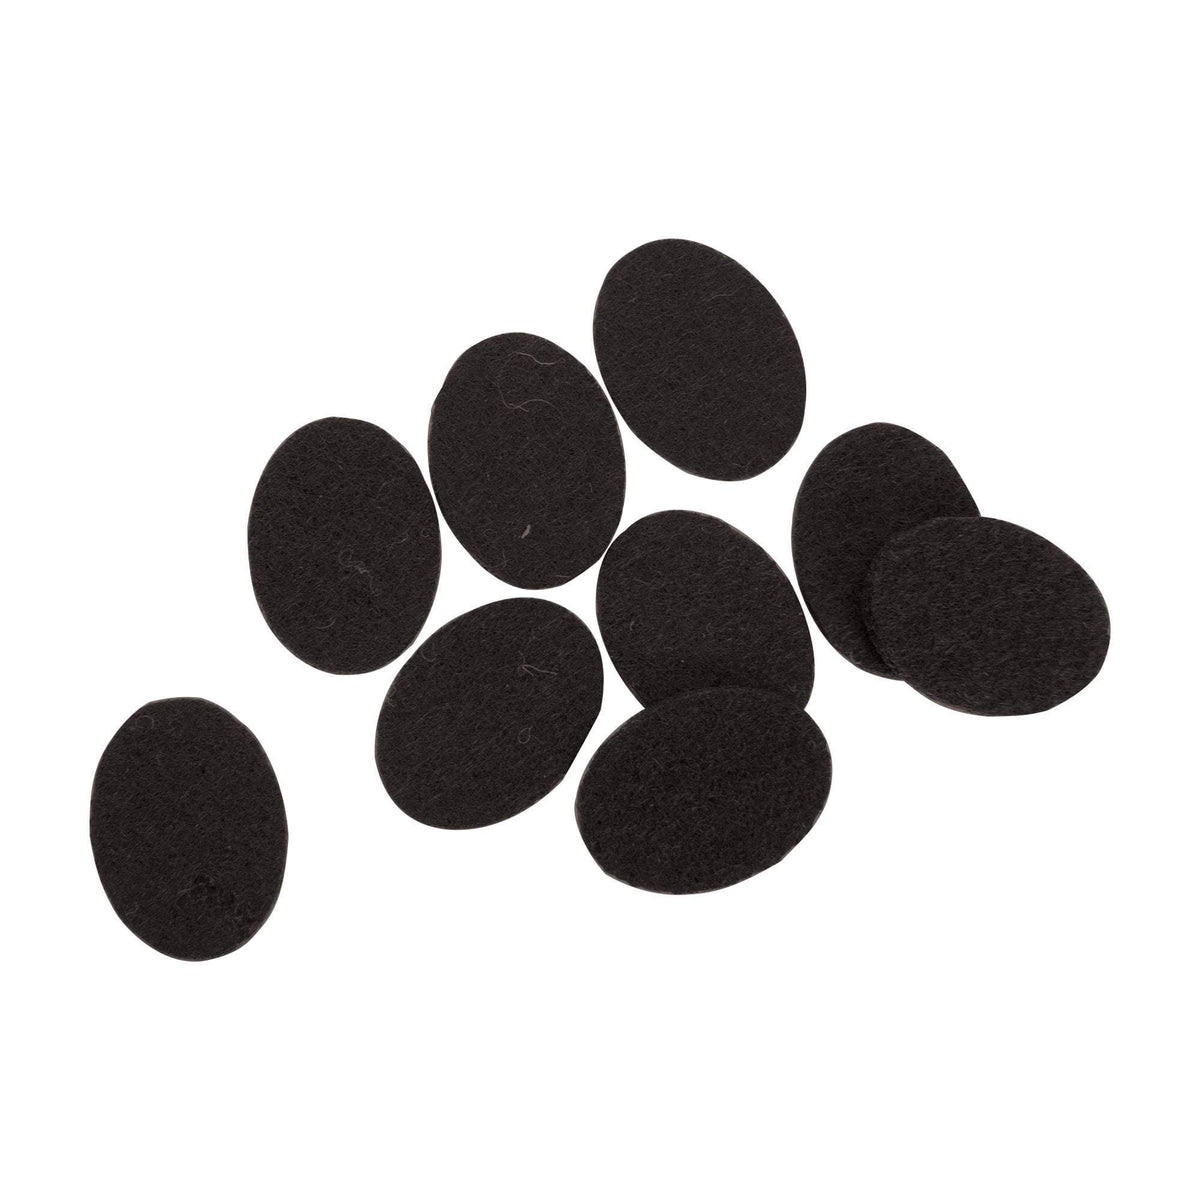 Serina & Company Oval Replacement Pads, Black